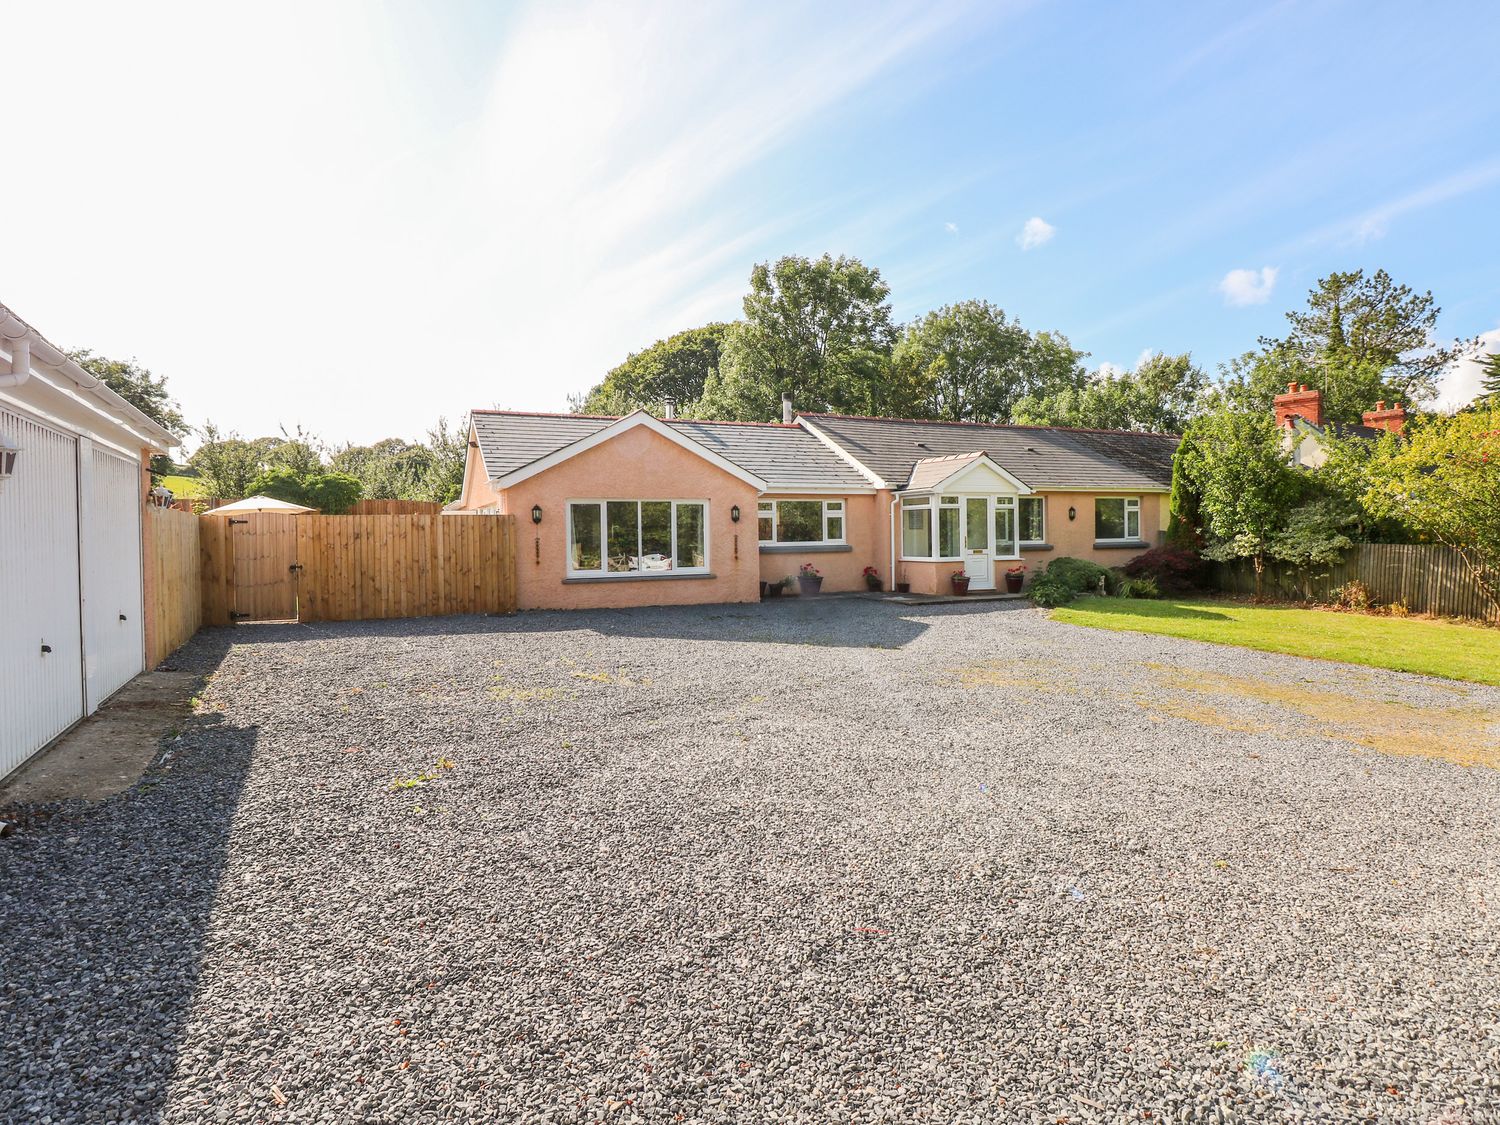 1 Homecroft Bungalows - South Wales - 1017256 - photo 1